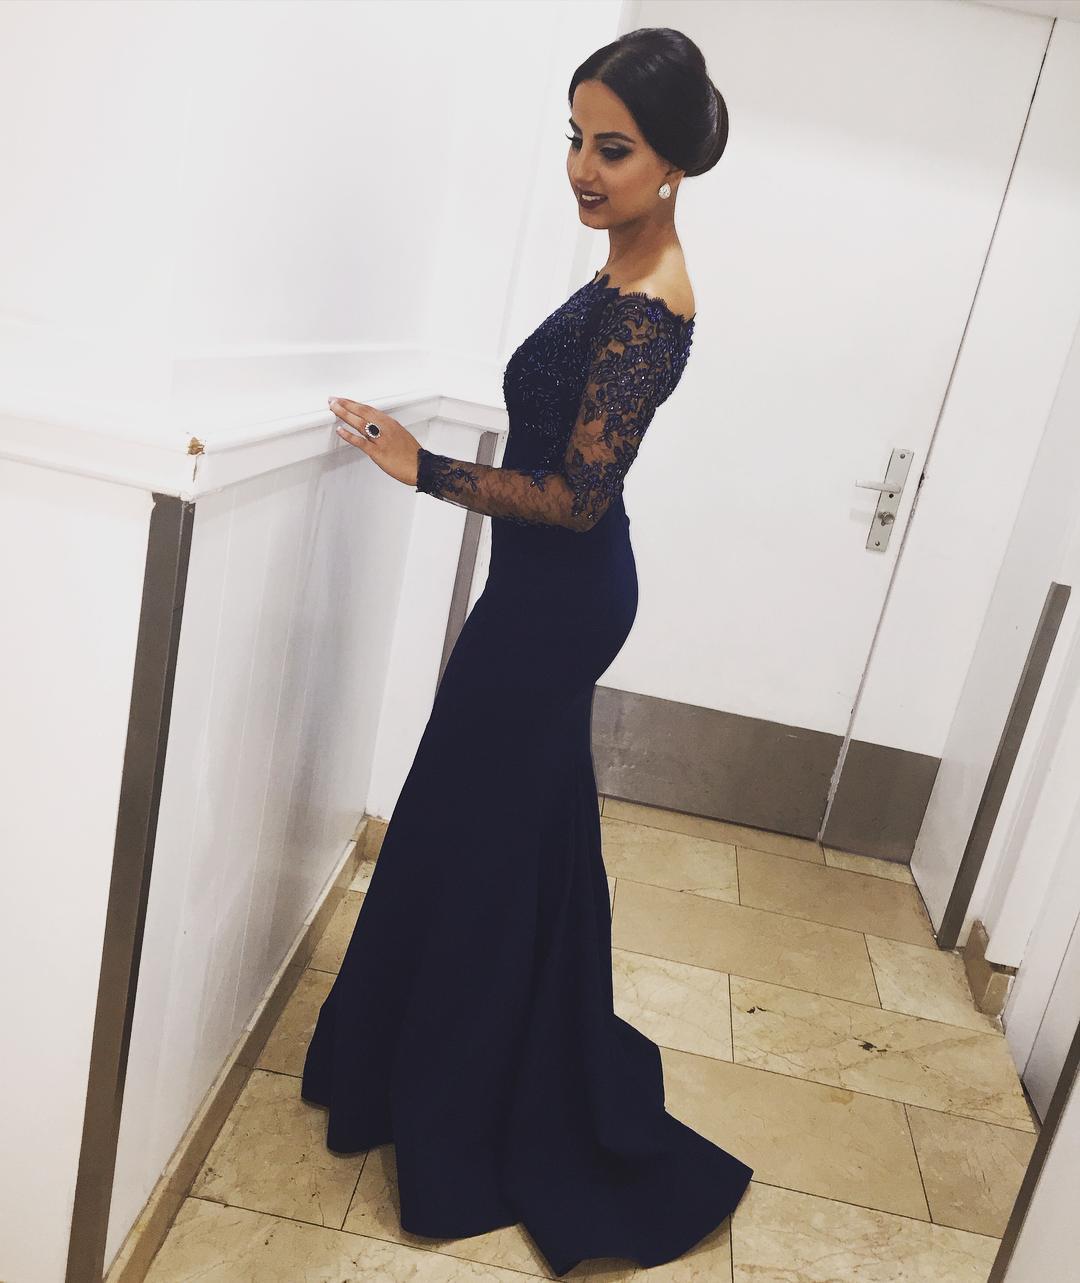 Off the Shoulder Mermaid Evening Dresses Long Sleeves Lace Women Formal Gowns Royal Blue